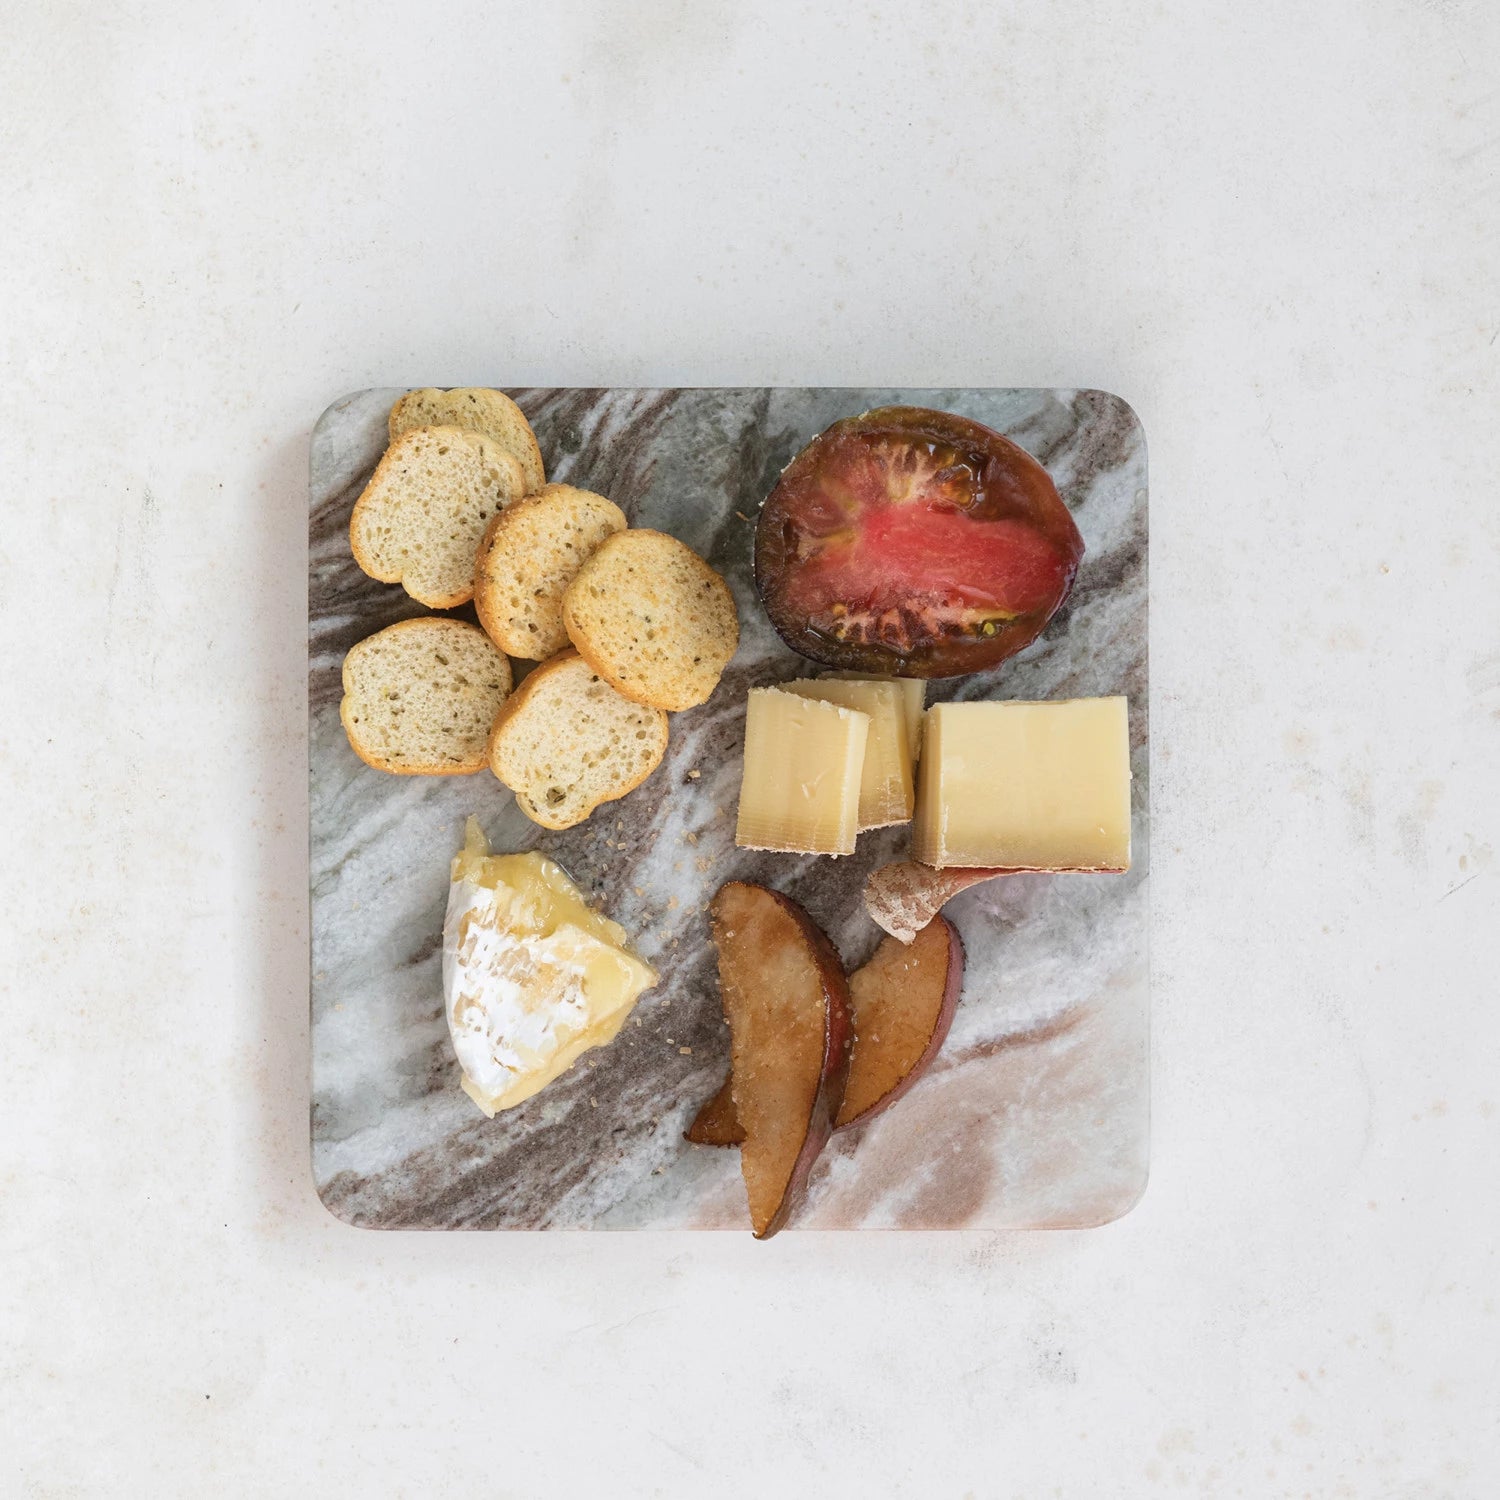 top view of marble with bread slices, cheese wedges, and fruits on it.